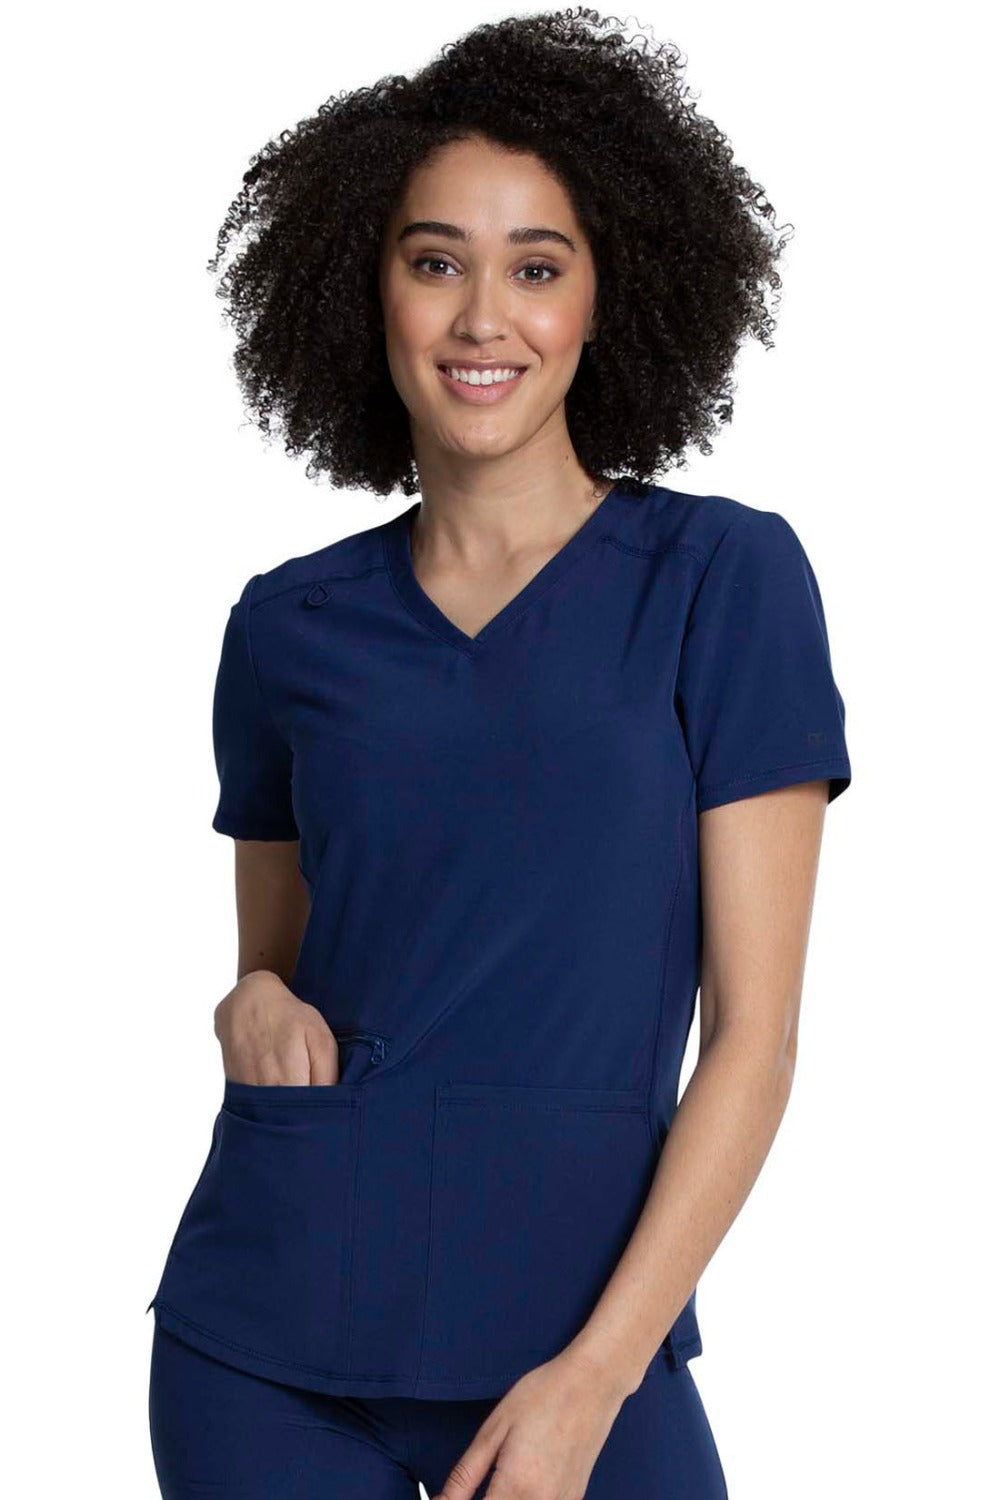 Cherokee Allura V-Neck Scrub Top in Navy at Parker's Clothing and Shoes.